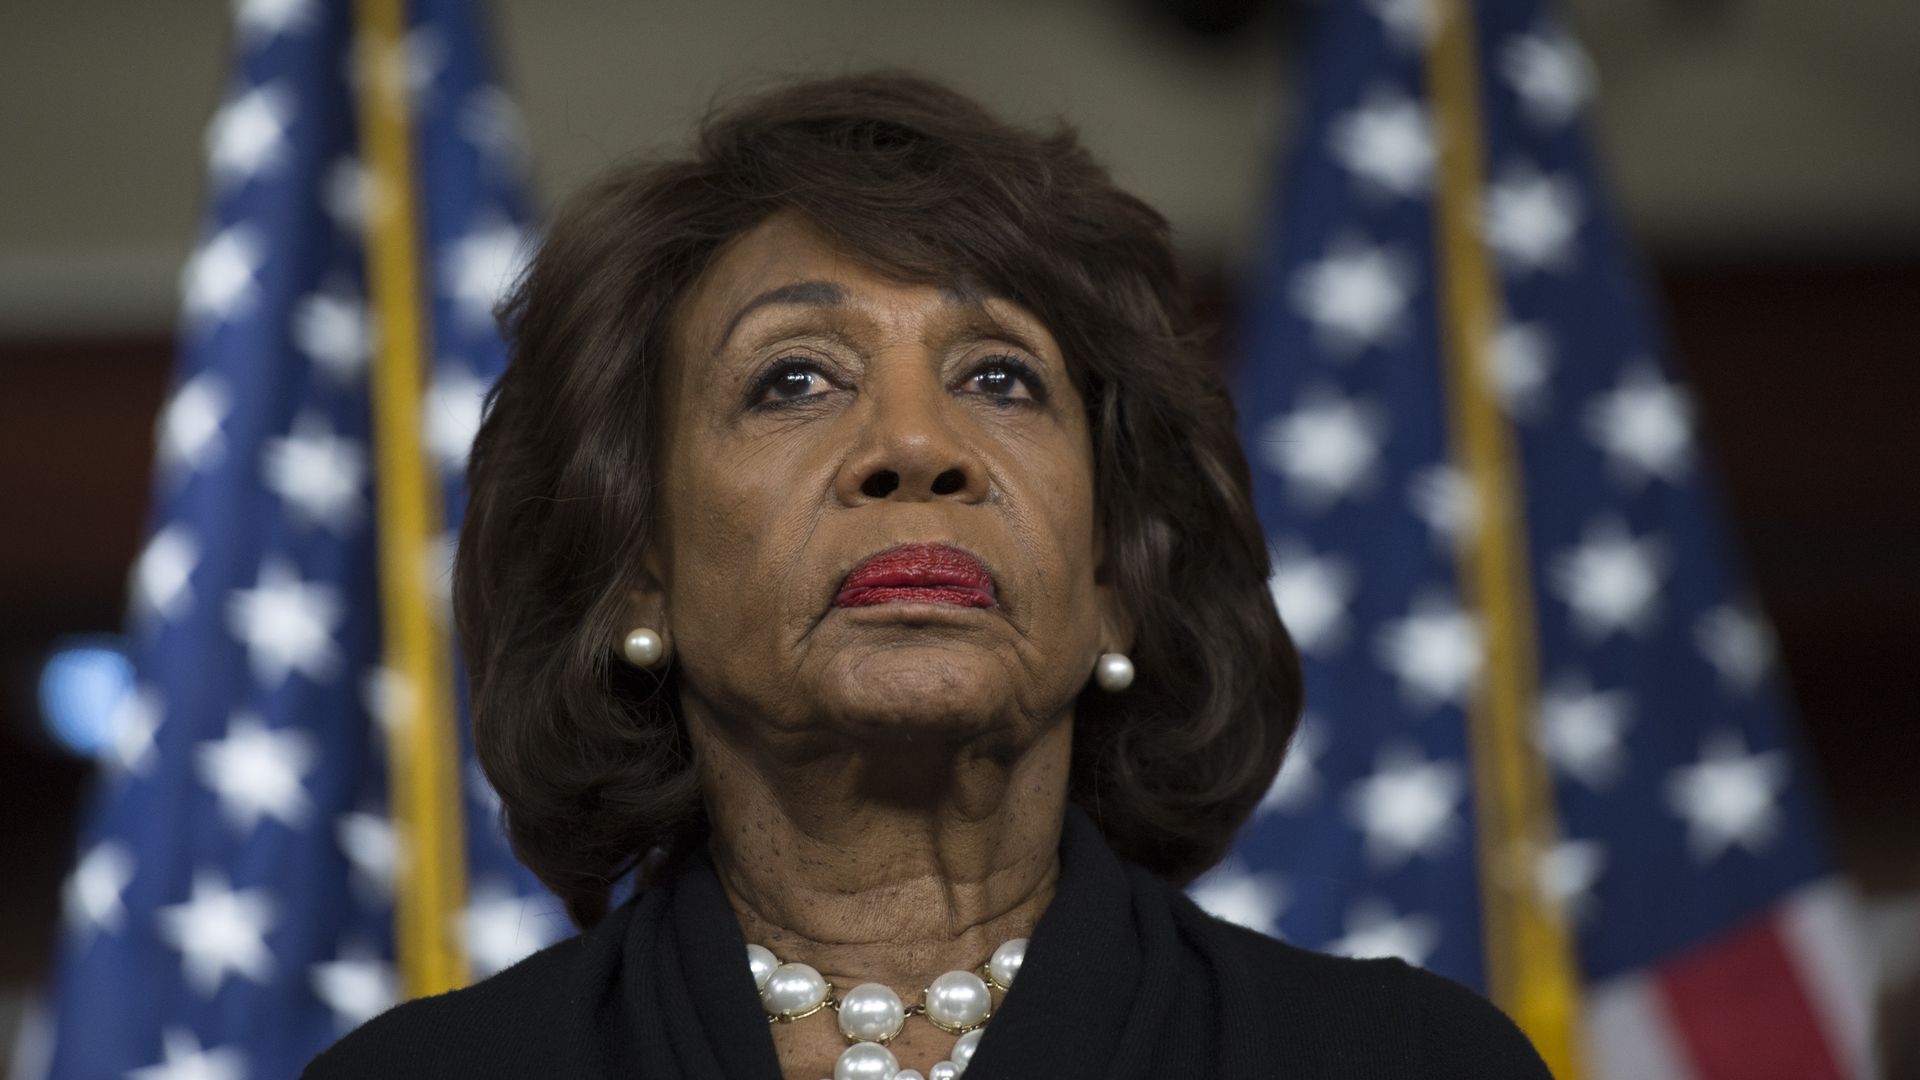 Maxine Waters in a black outfit frowning. 